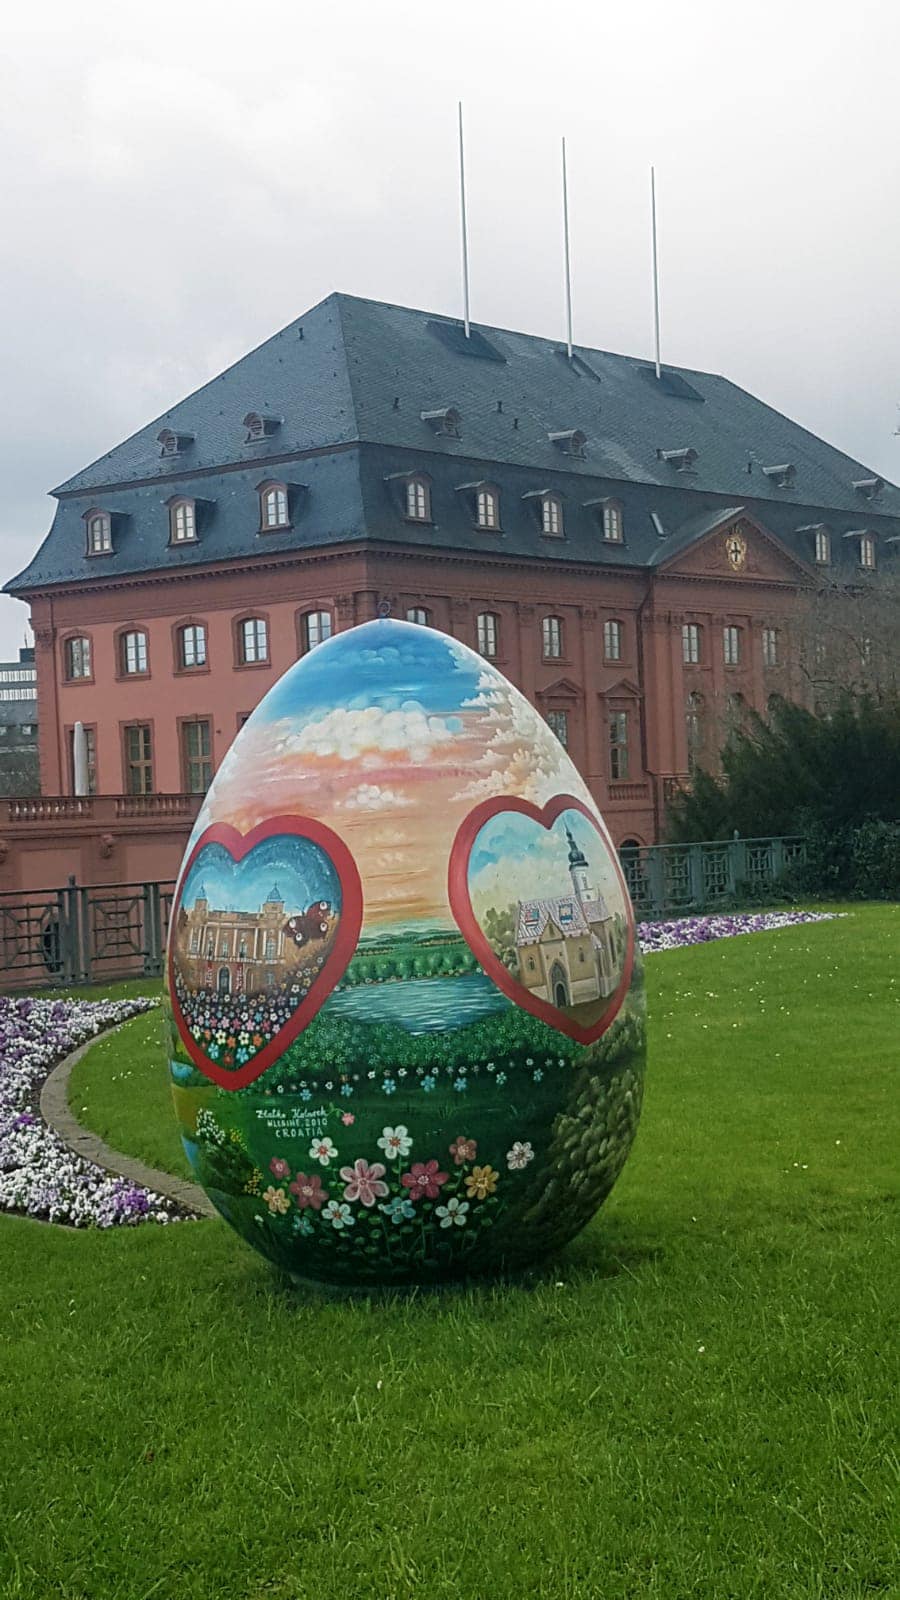 Giant Easter eggs in distinctive Croatian naive style on display in the center of Mainz